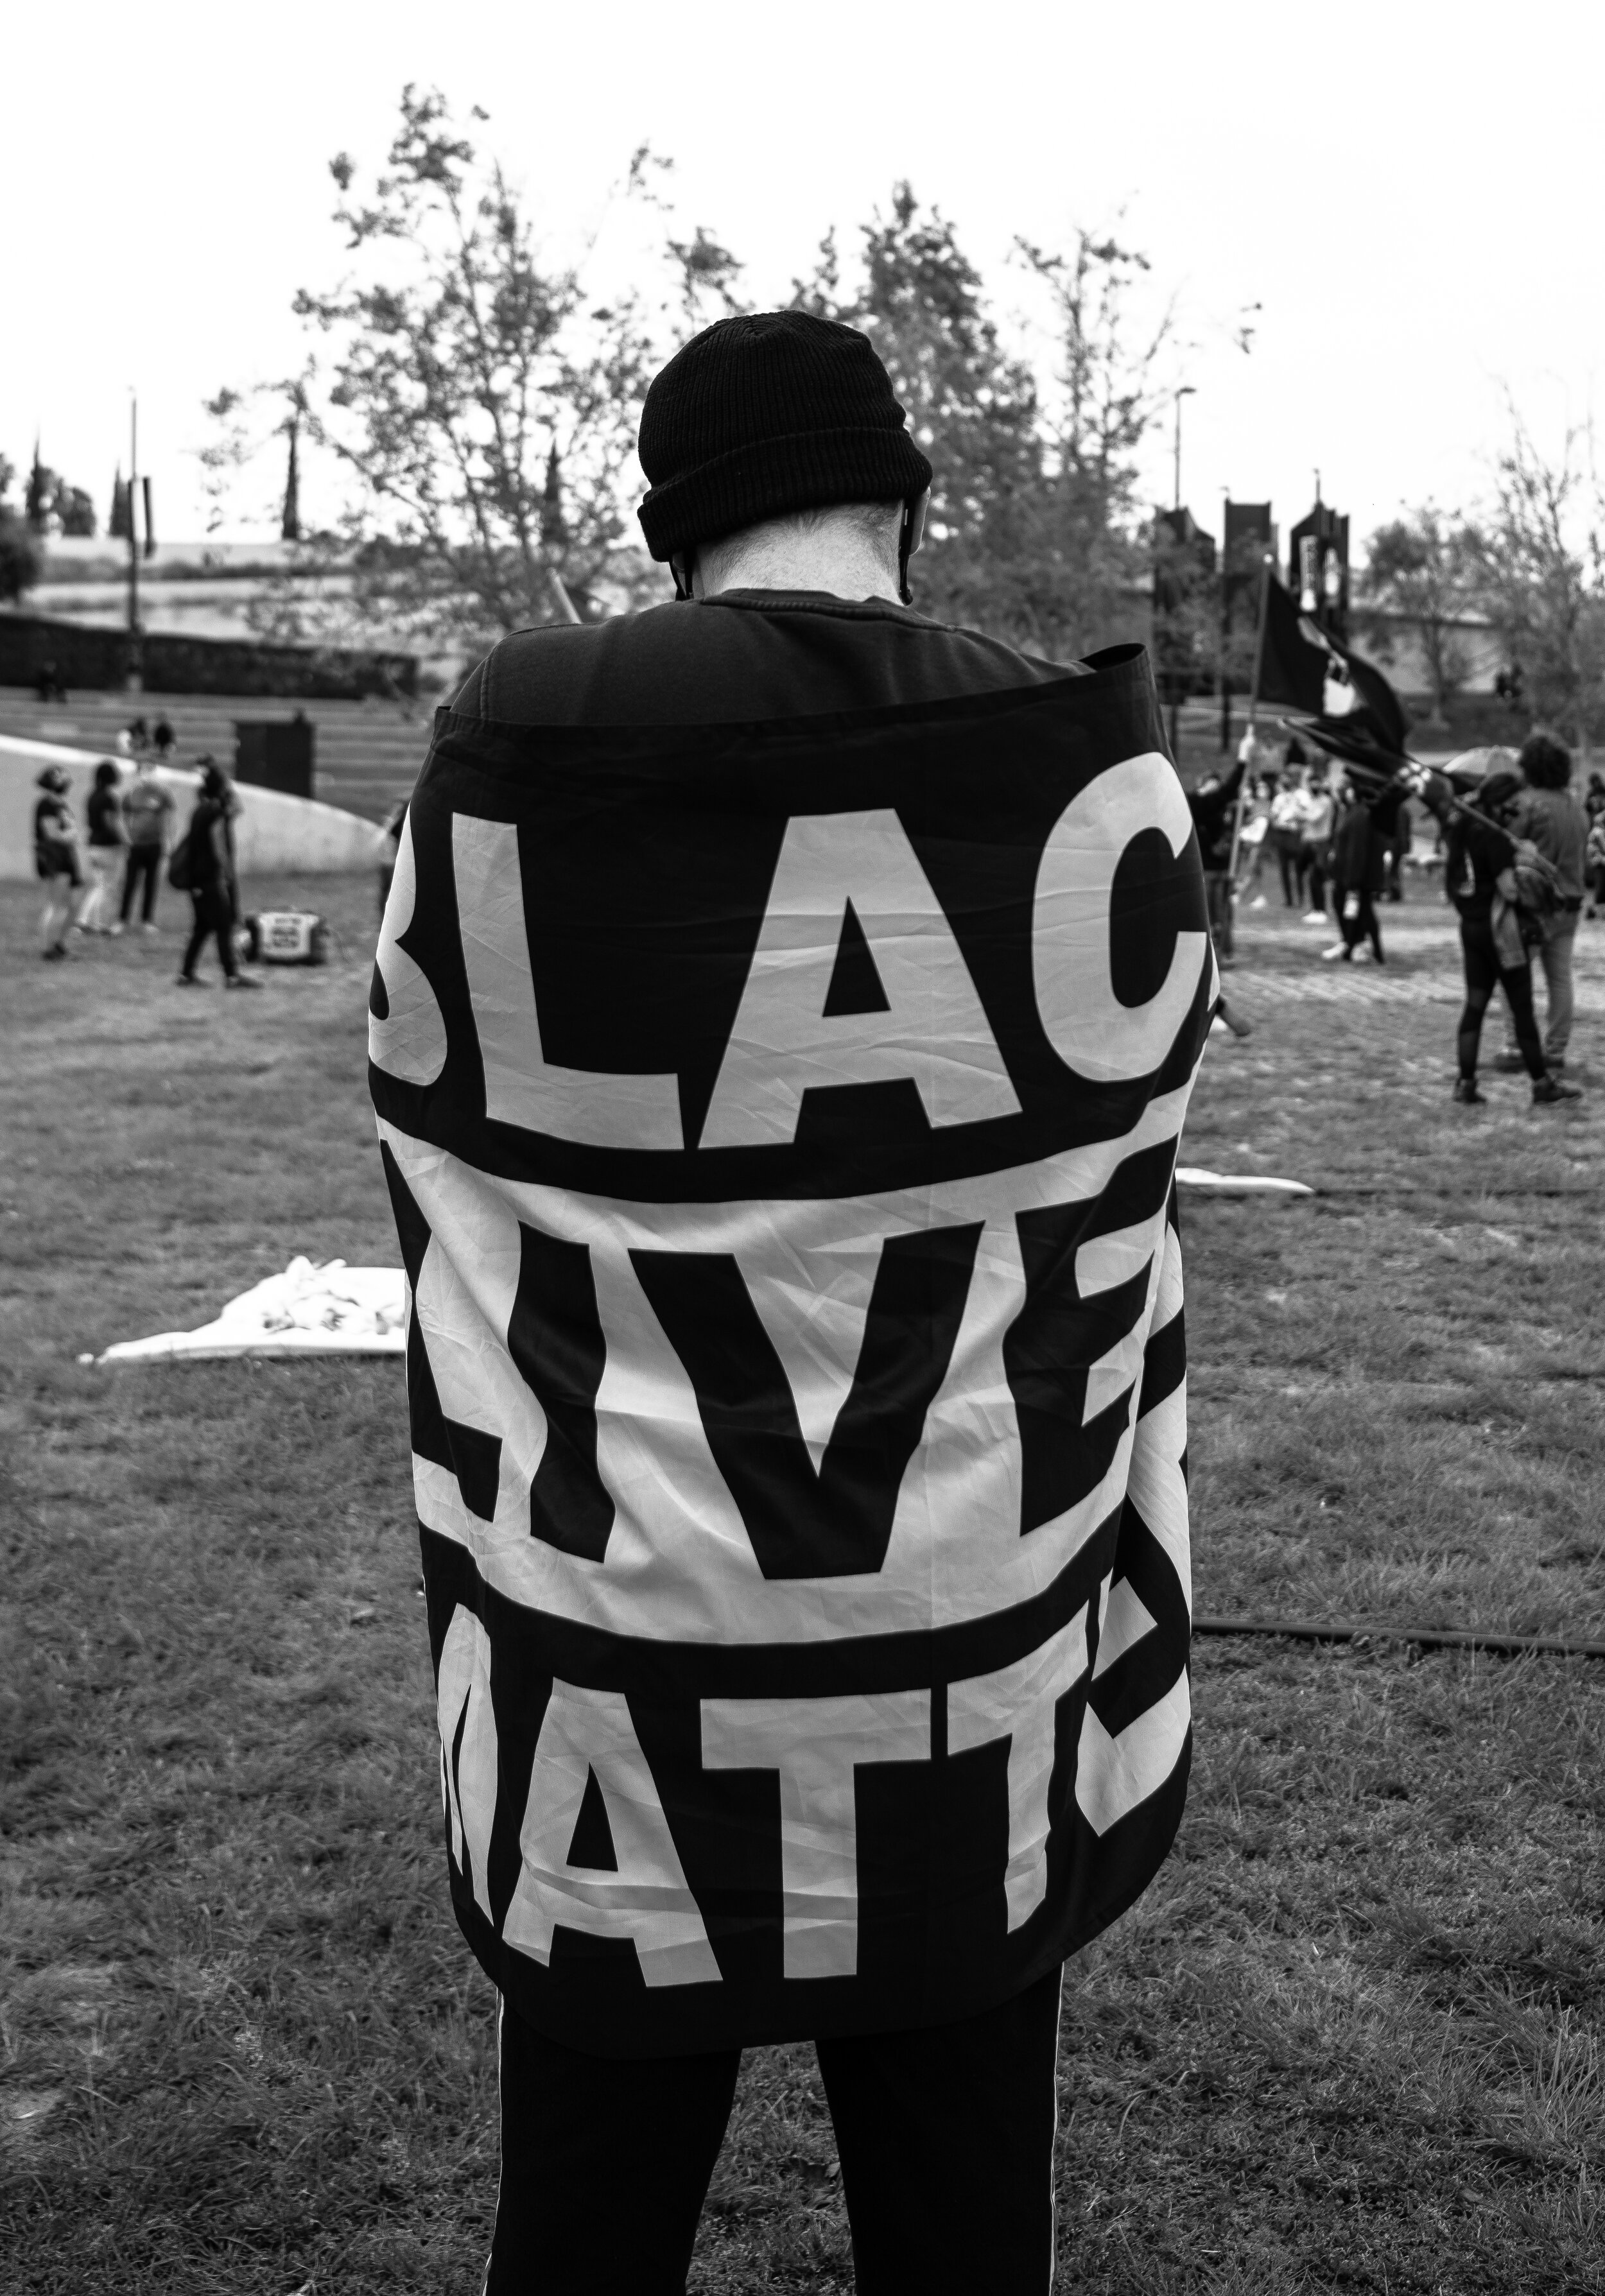  A Black Lives Matter supporter stands proudly with a Black Lives Matter flag draped acrossed his back at the event memorial held for George Floyd on April 25, 2021 in Hollywood Calif. (Jon Putman / The Corsair) 